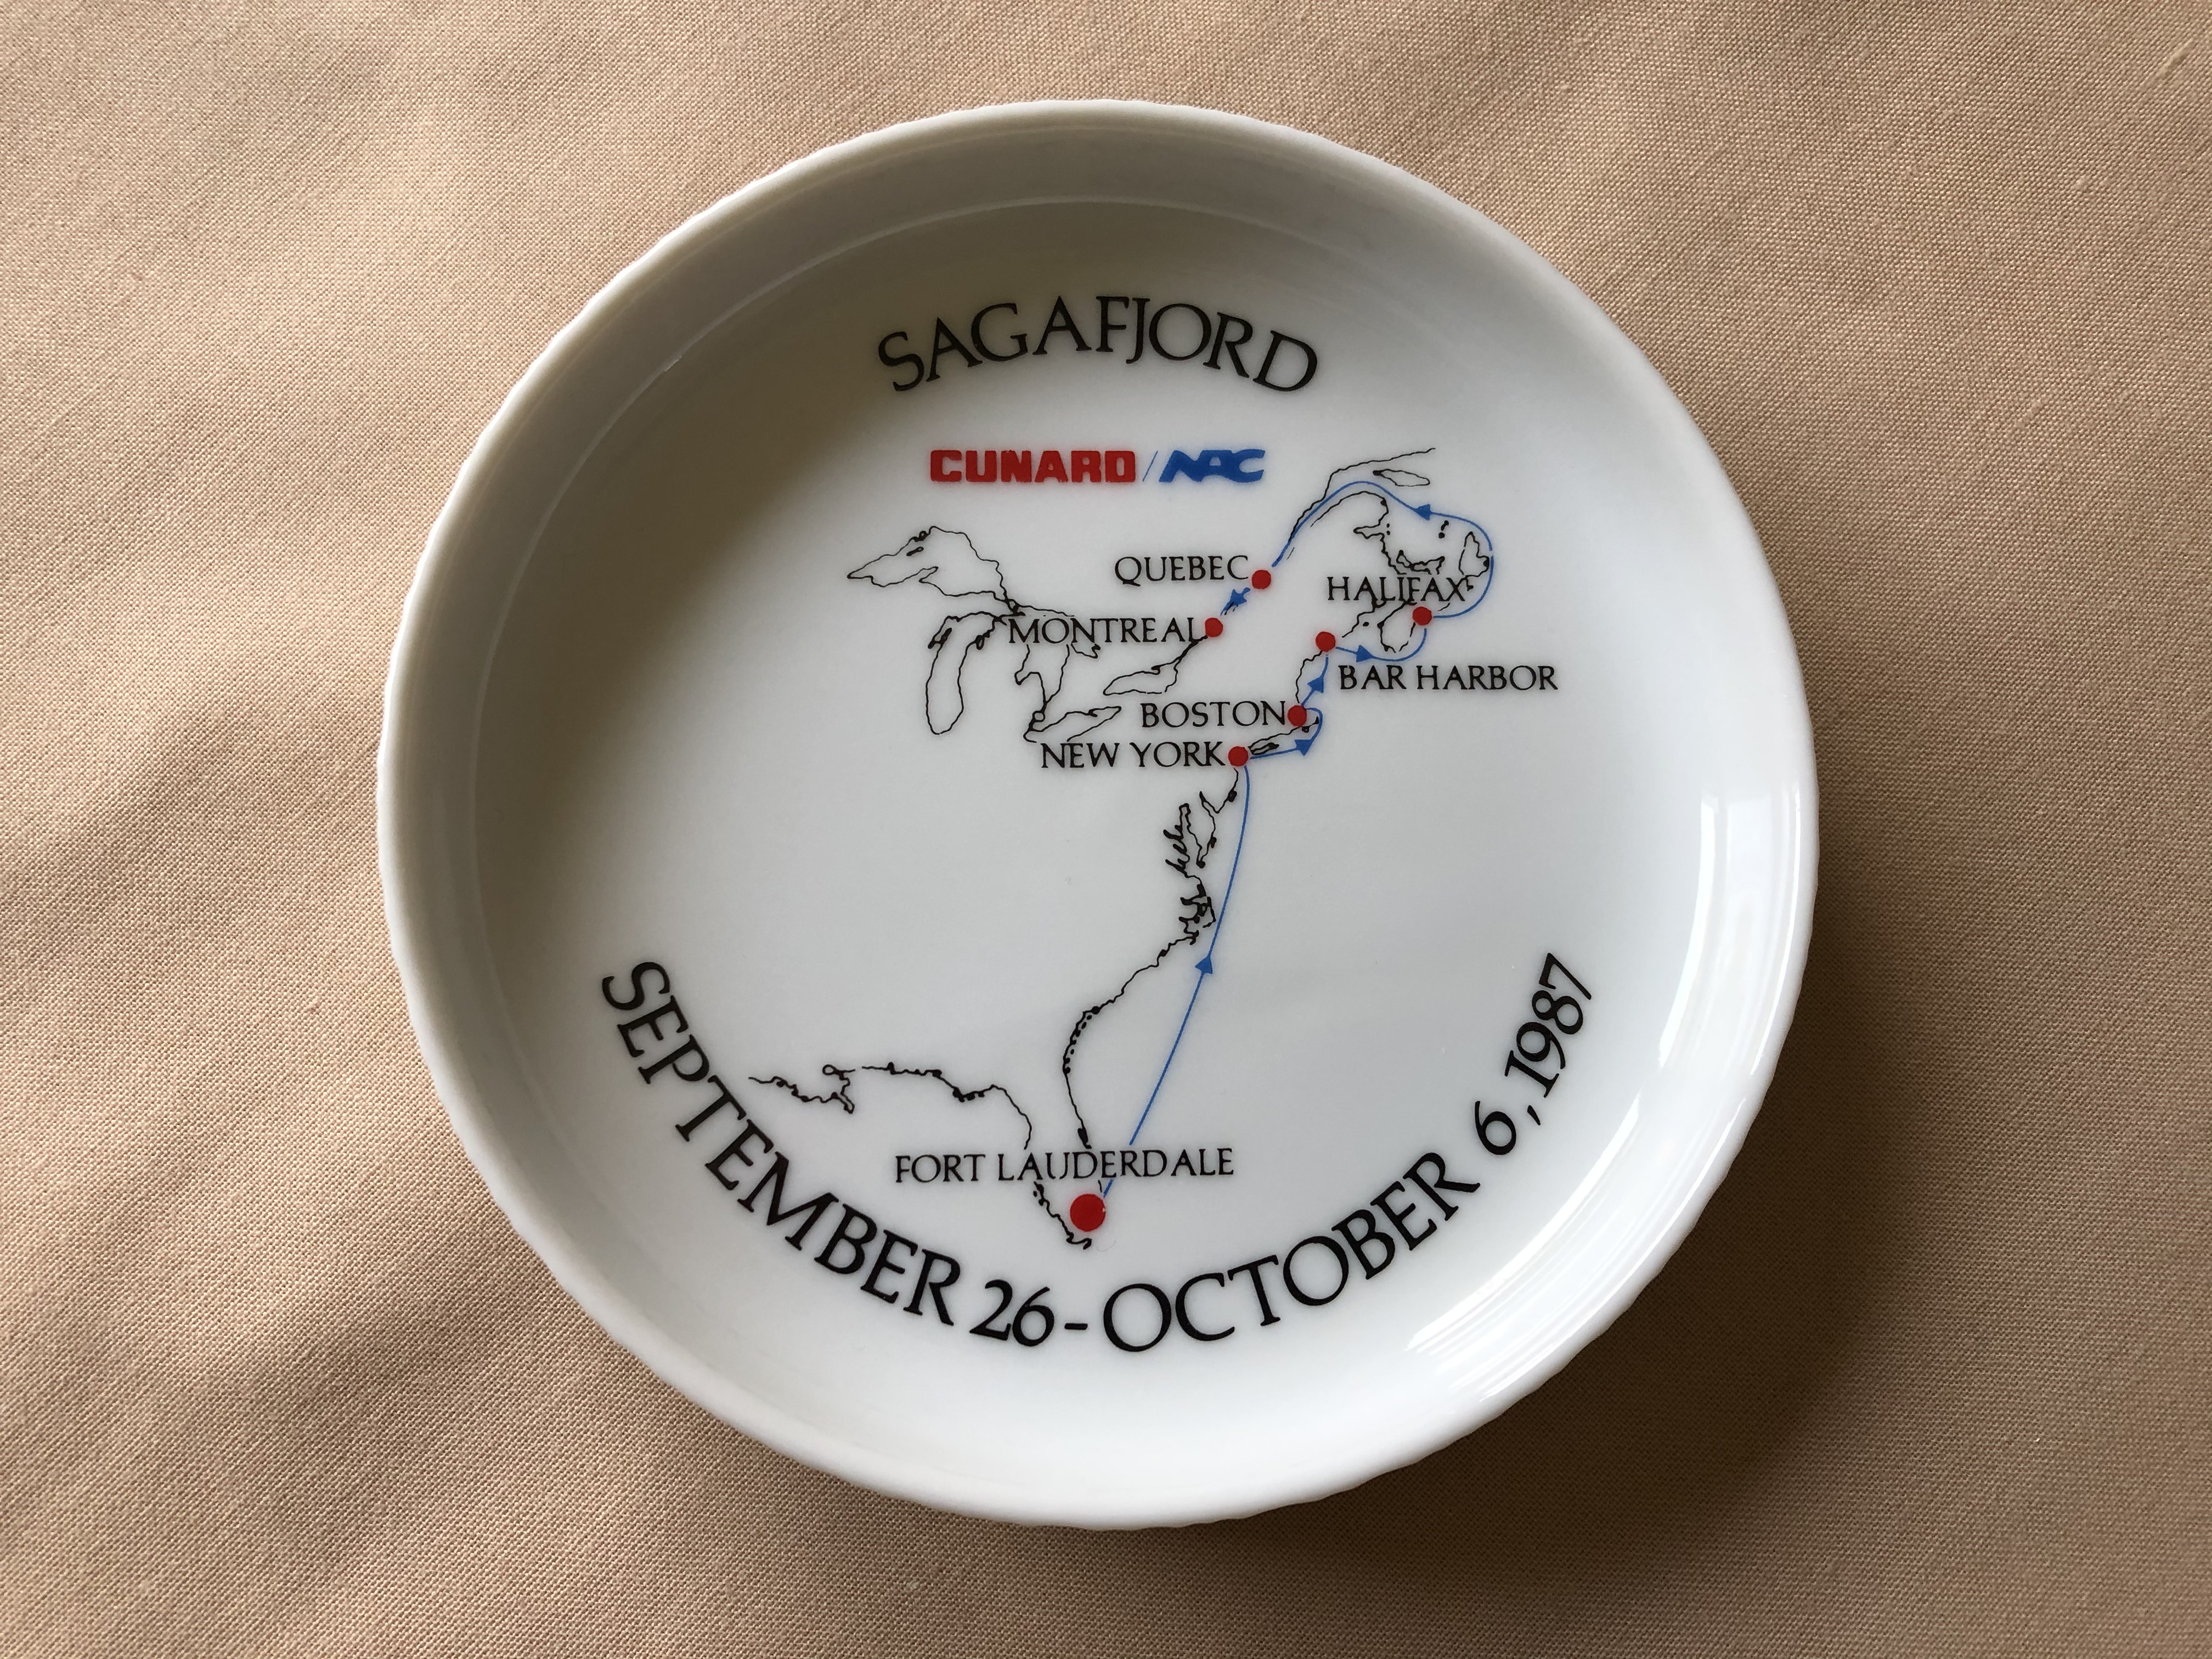 DECORATIVE CHINA MAP DISH FROM THE CUNARD LINE VESSEL THE MS SAGAFJORD